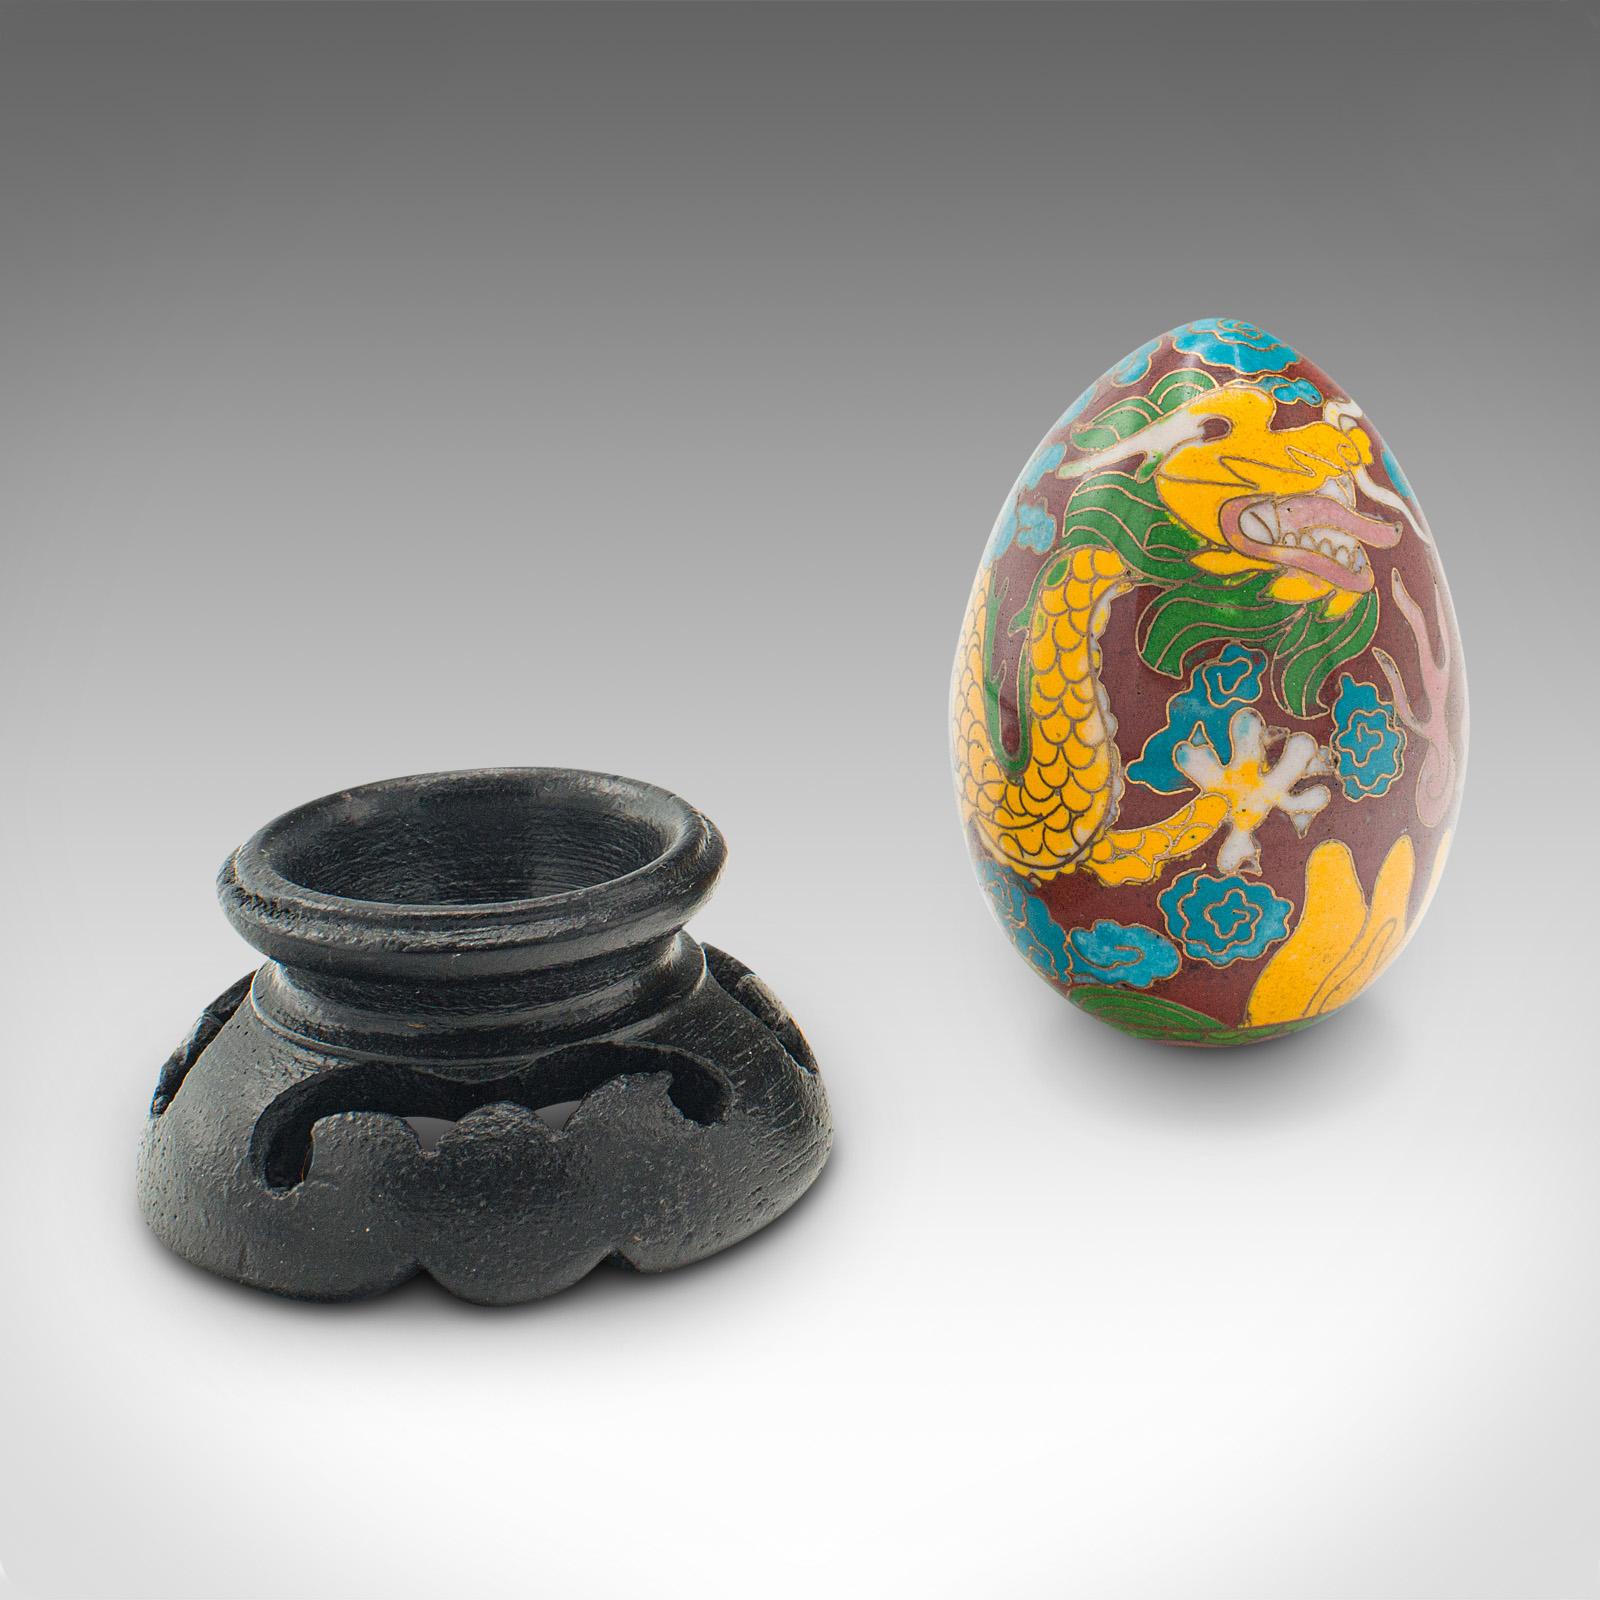 Small Vintage Cloisonne Decorative Egg, Chinese, Enamelled, Ornament, circa 1970 For Sale 3